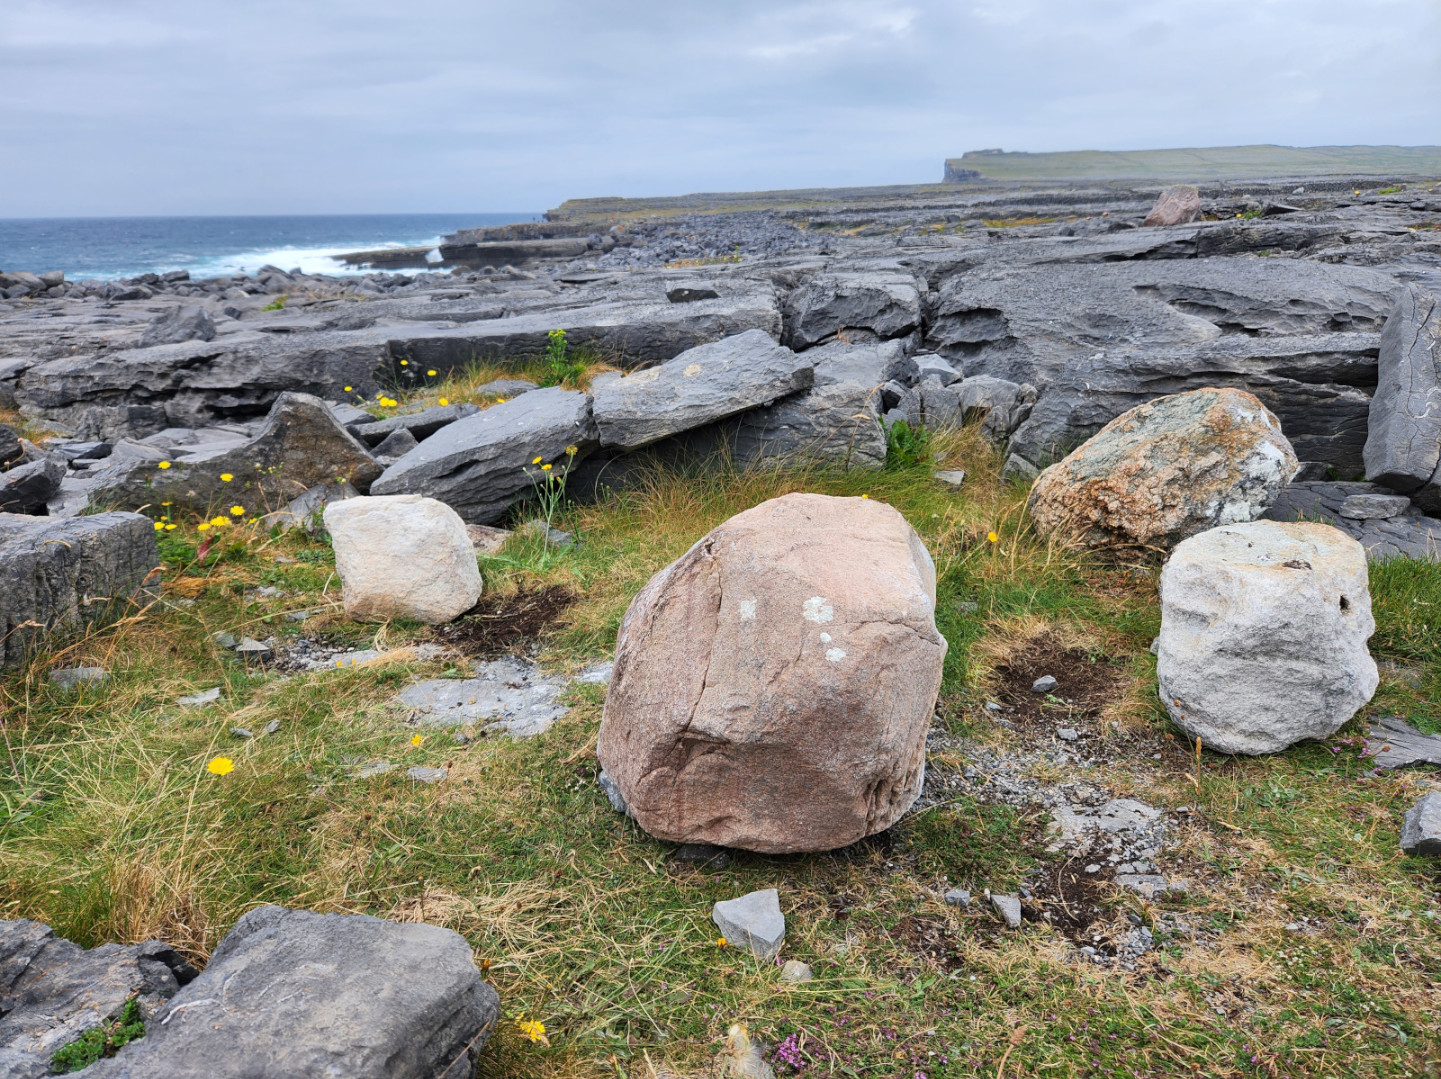 The stone of Inishmore